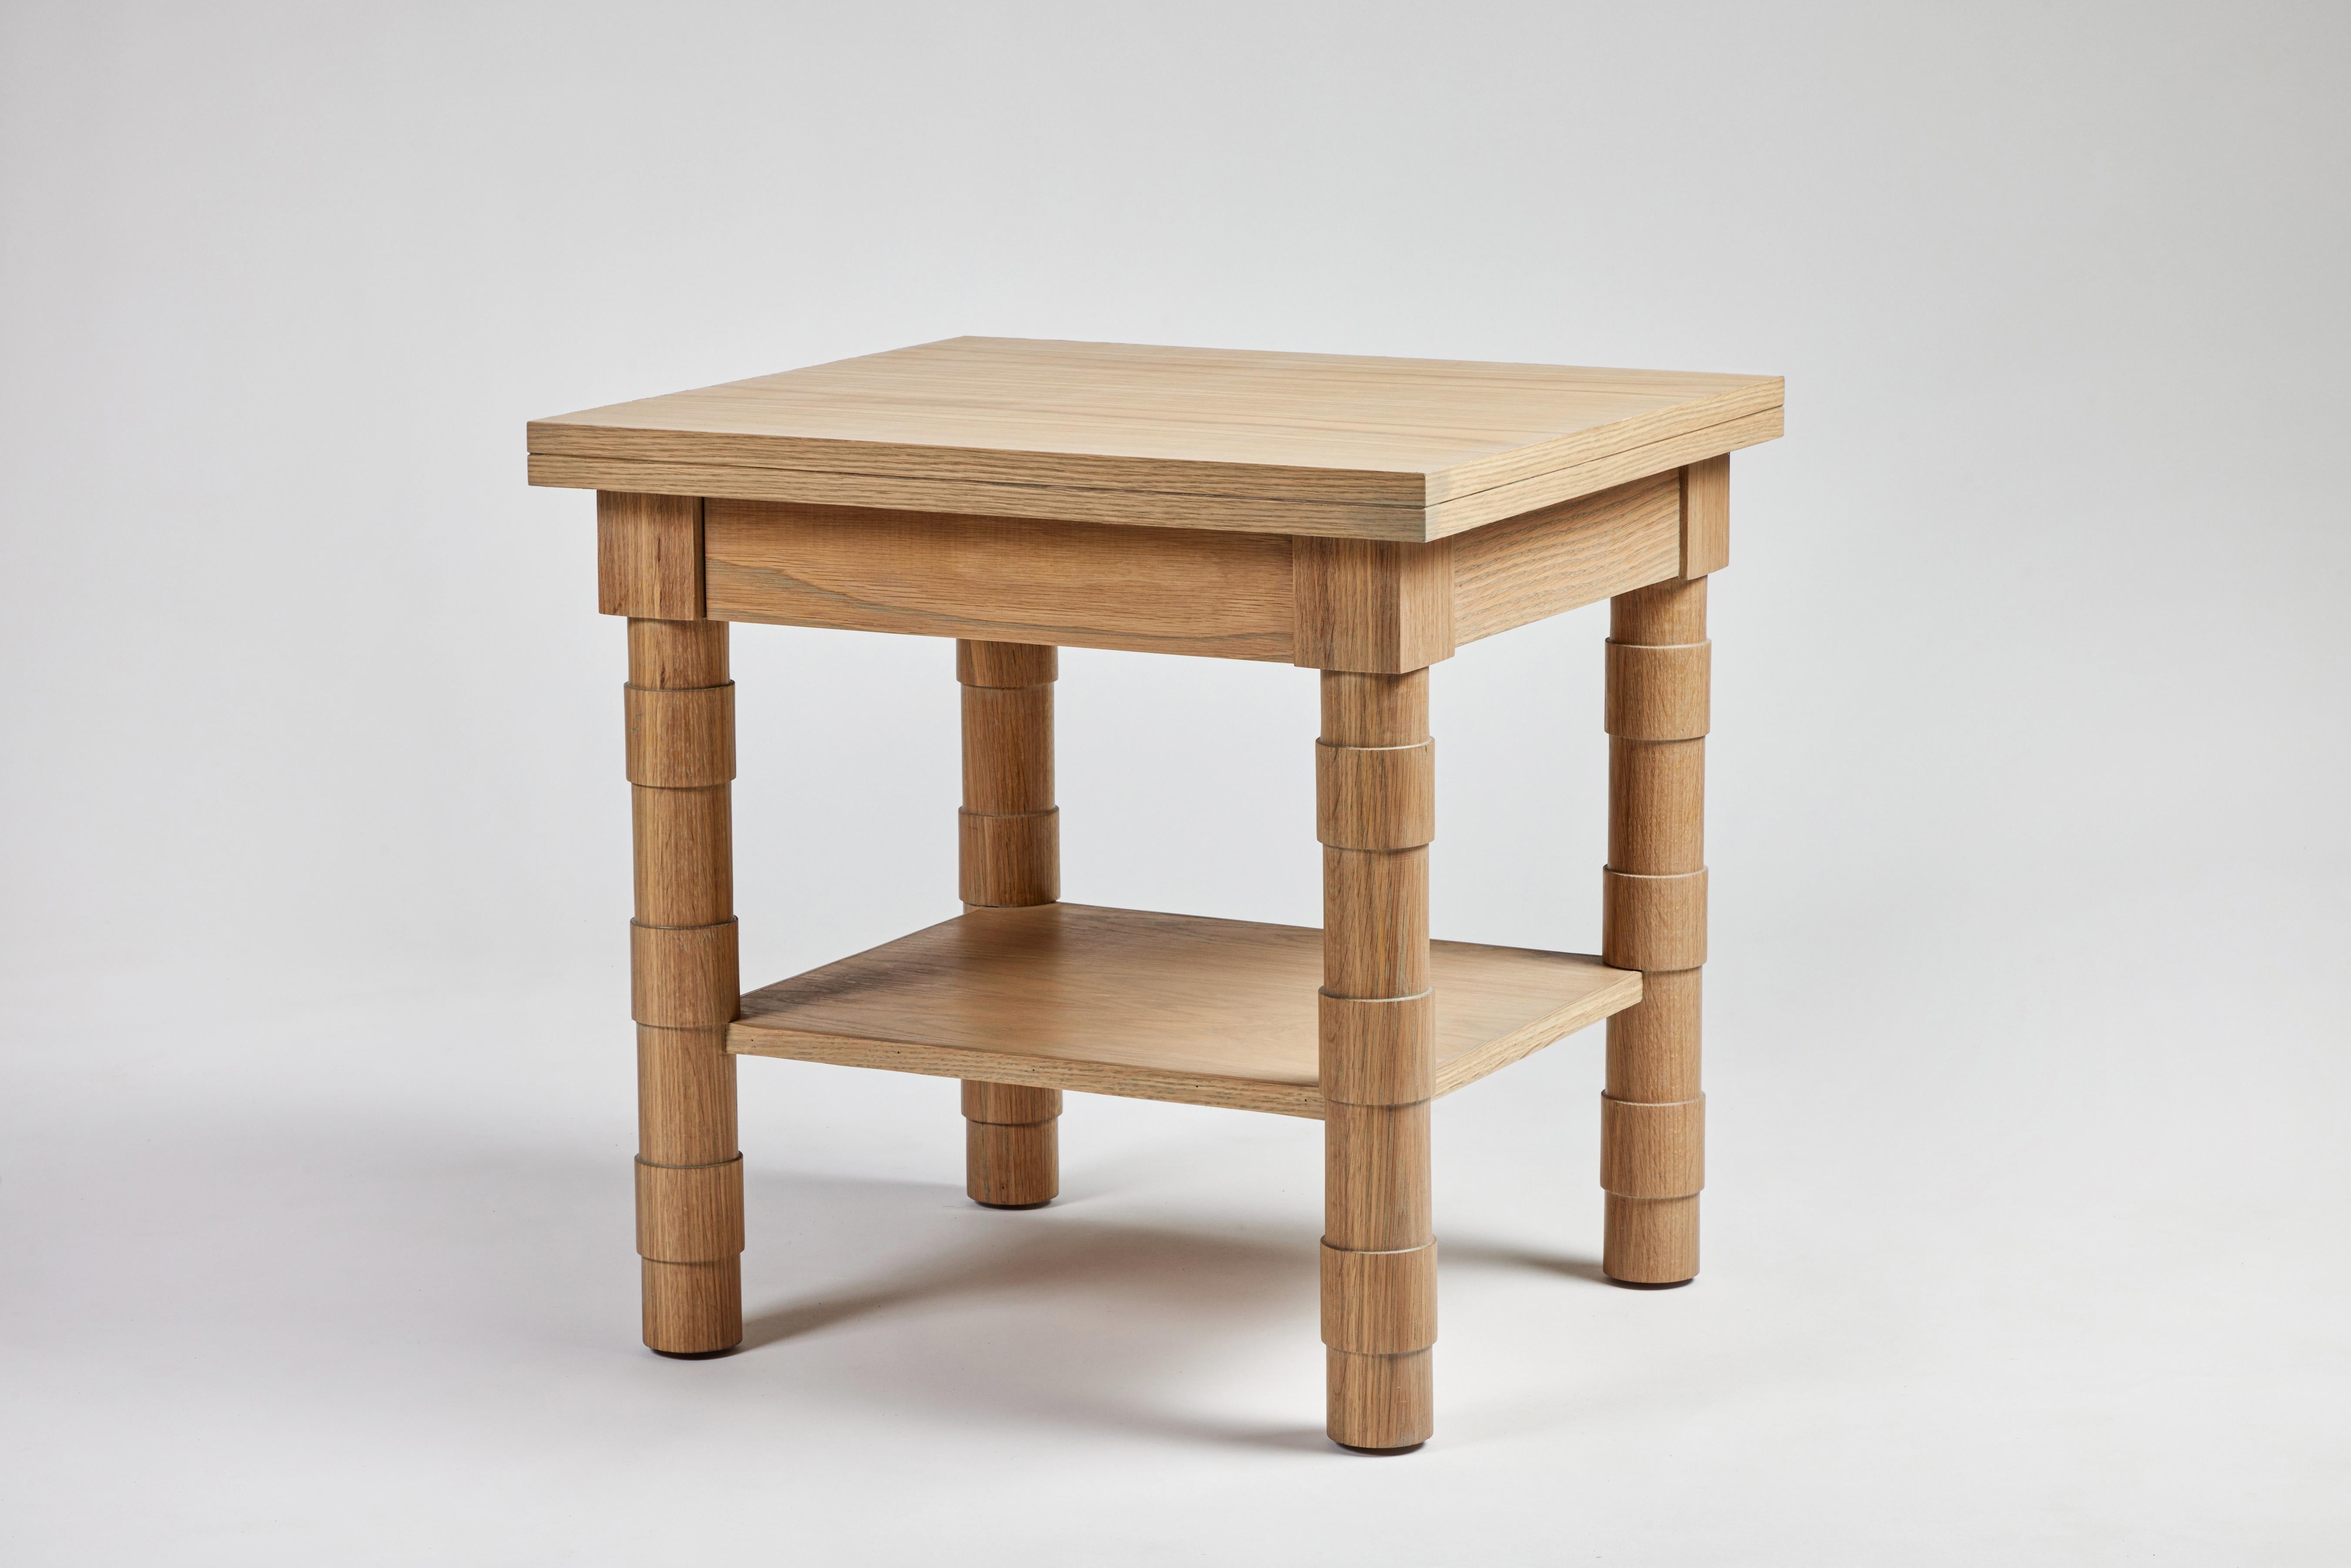 Contemporary Transitional Turned Leg Jenks Side Table in Oak by Martin and Brockett For Sale